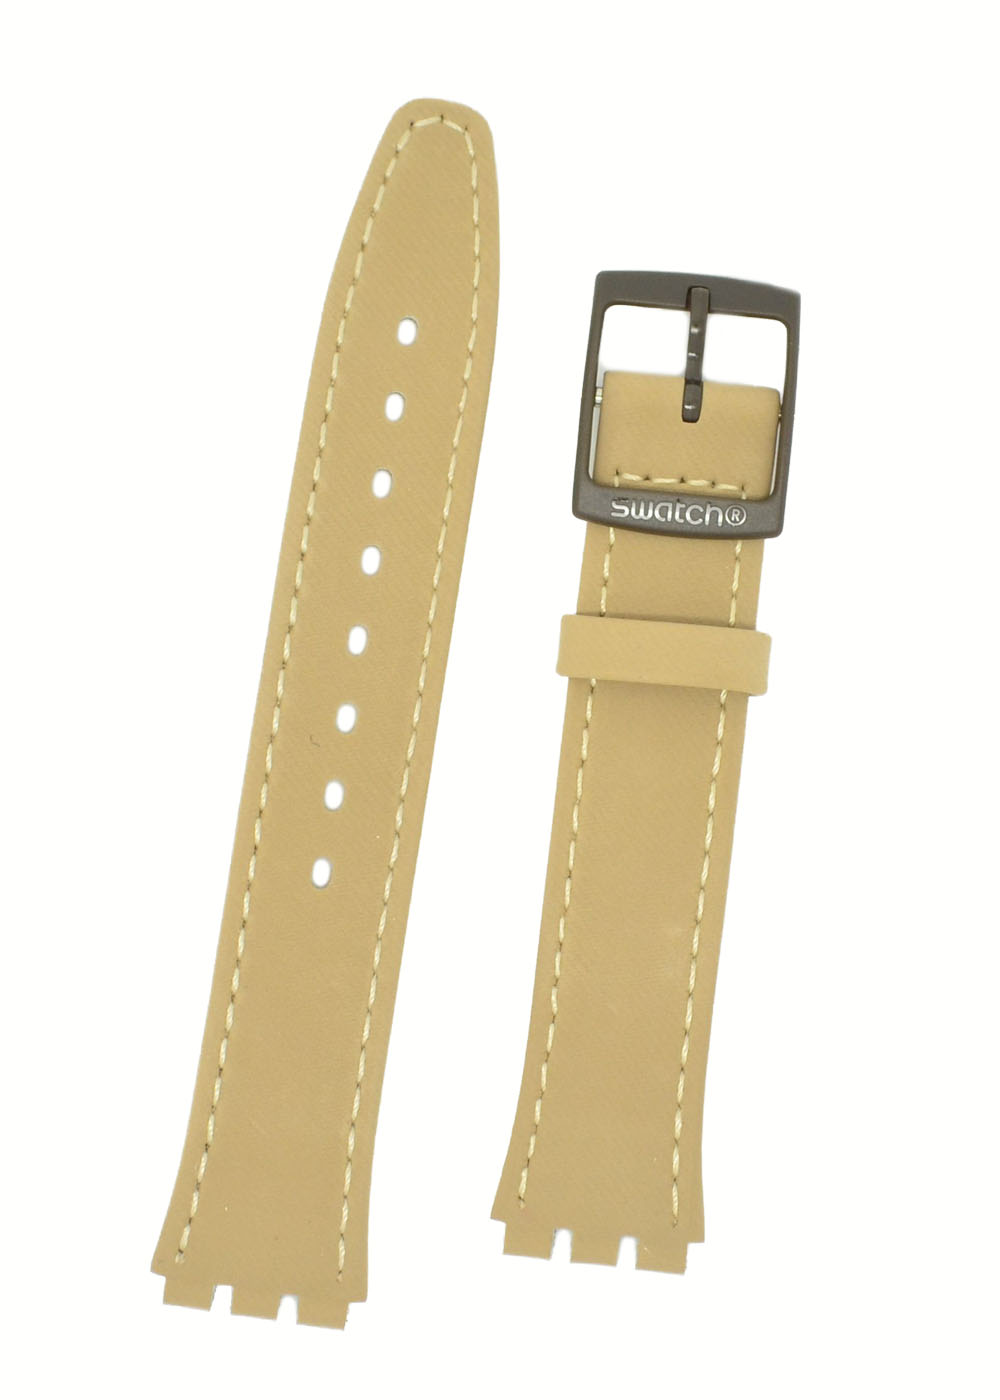 Swatch Watch Straps, UK Swatch Strap Replacements